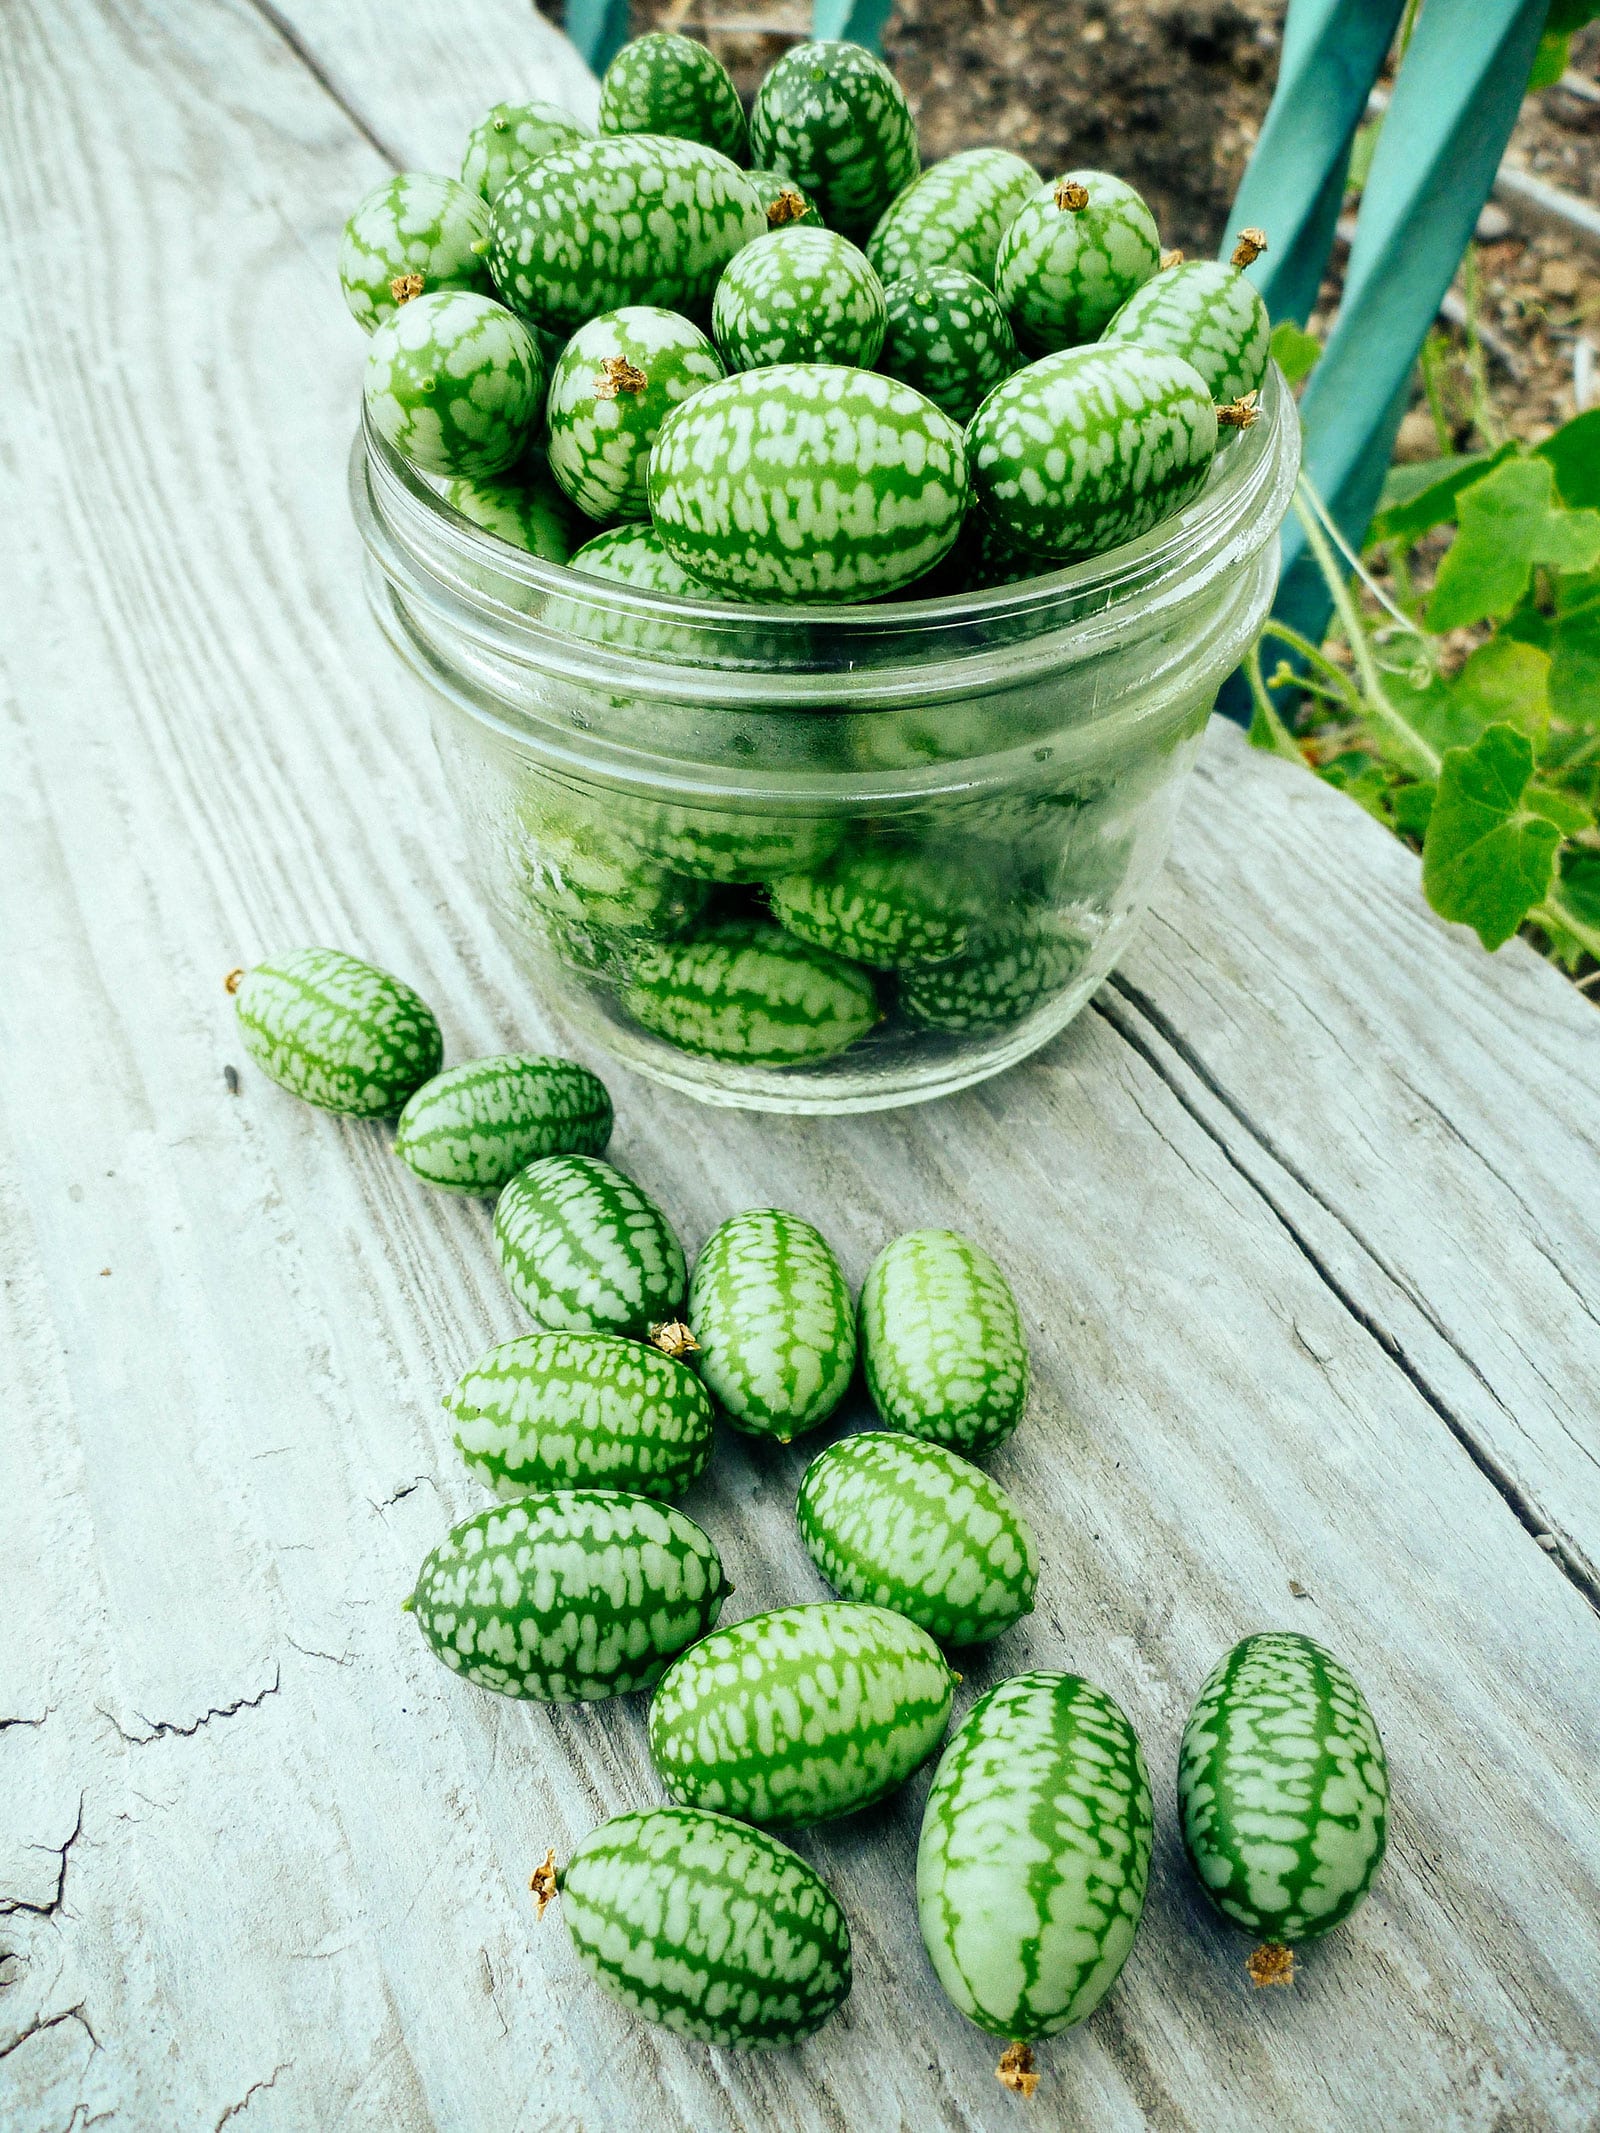 A half pint-sized glass jar overflowing with cucamelons just harvested from a garden